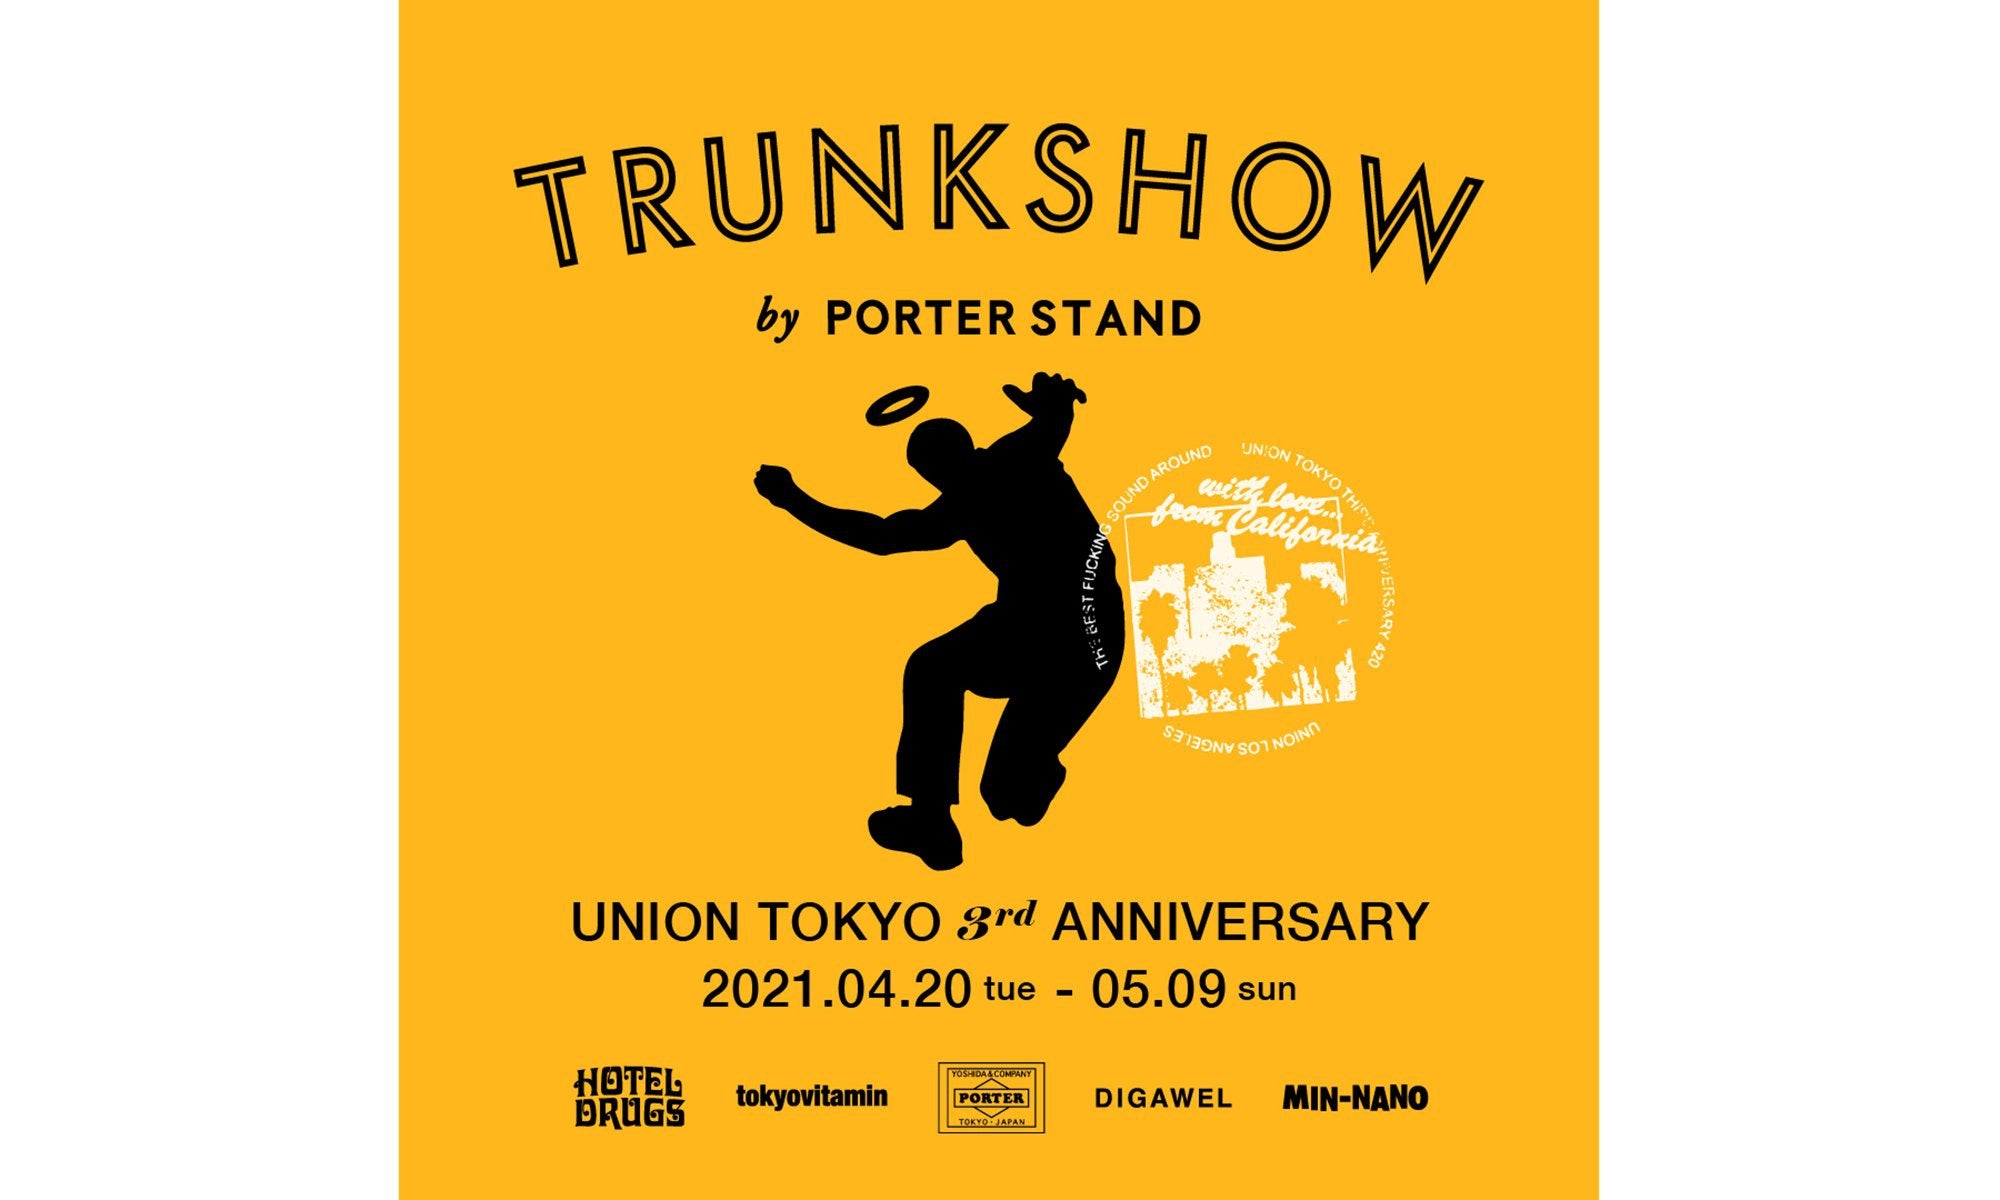 UNION TOKYO 3rd ANNIVERSARY TRUNK SHOW」by PORTER STAND